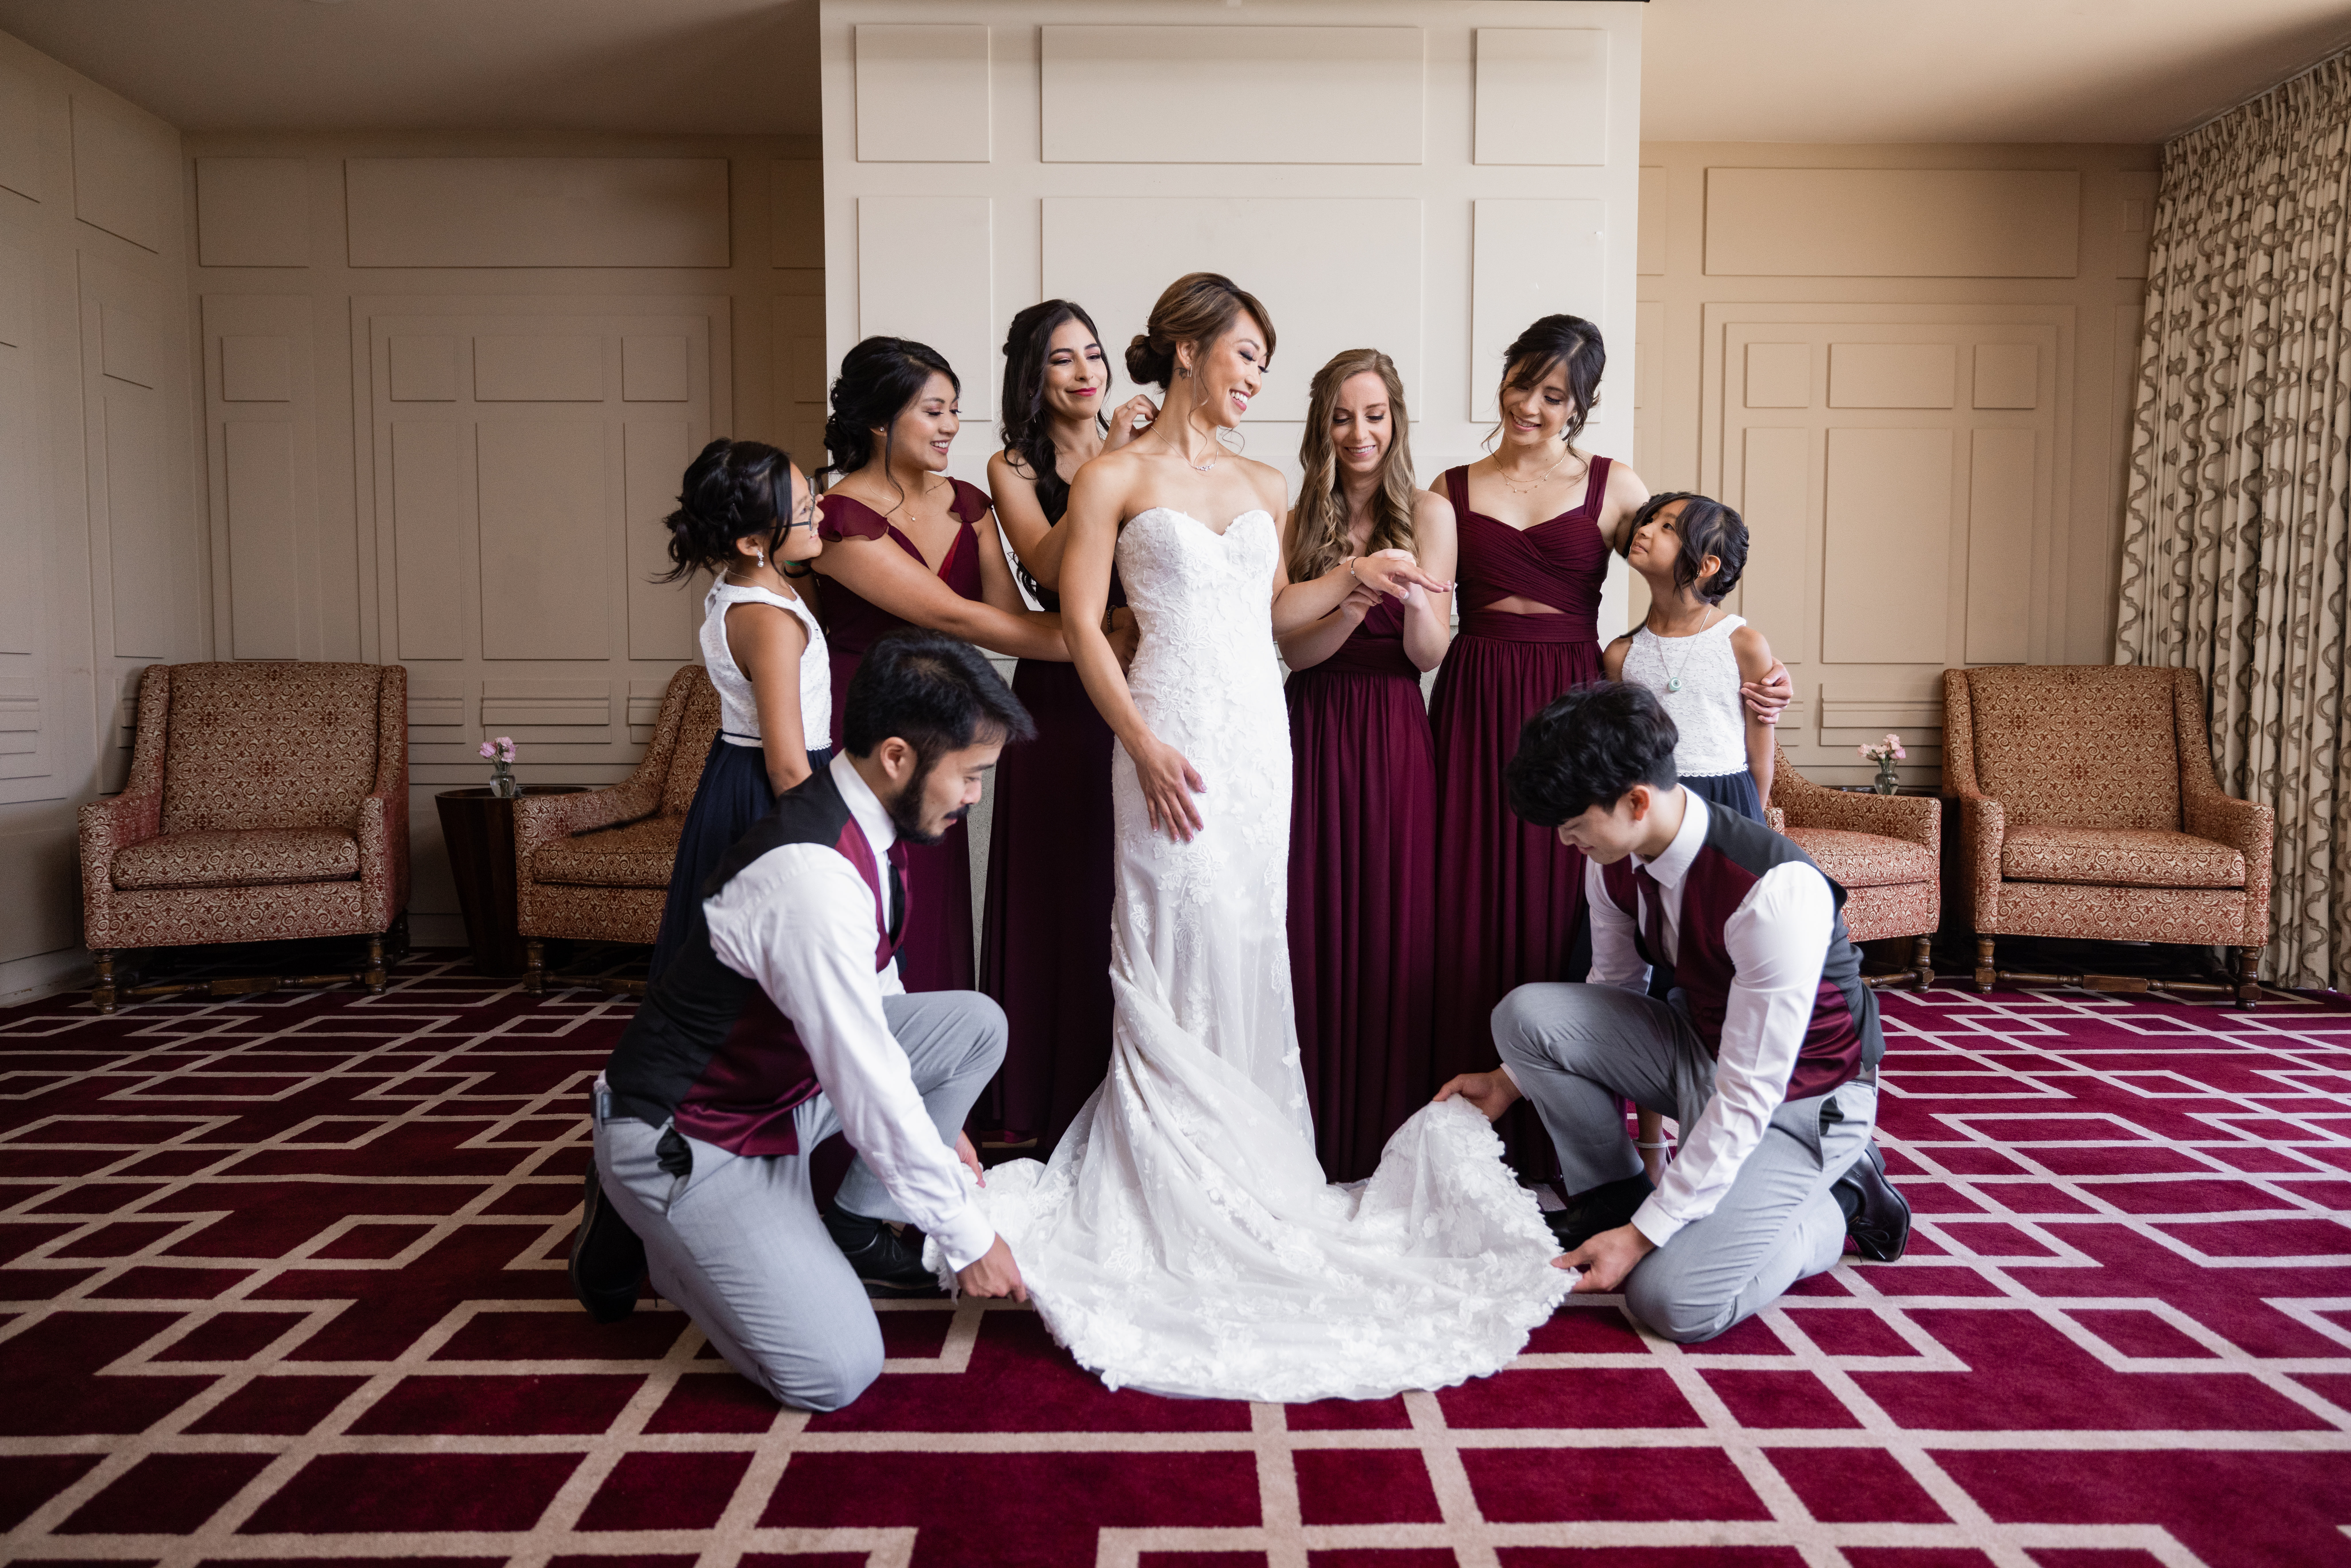 bride with co-ed wedding party in jewel toned maroon outfits